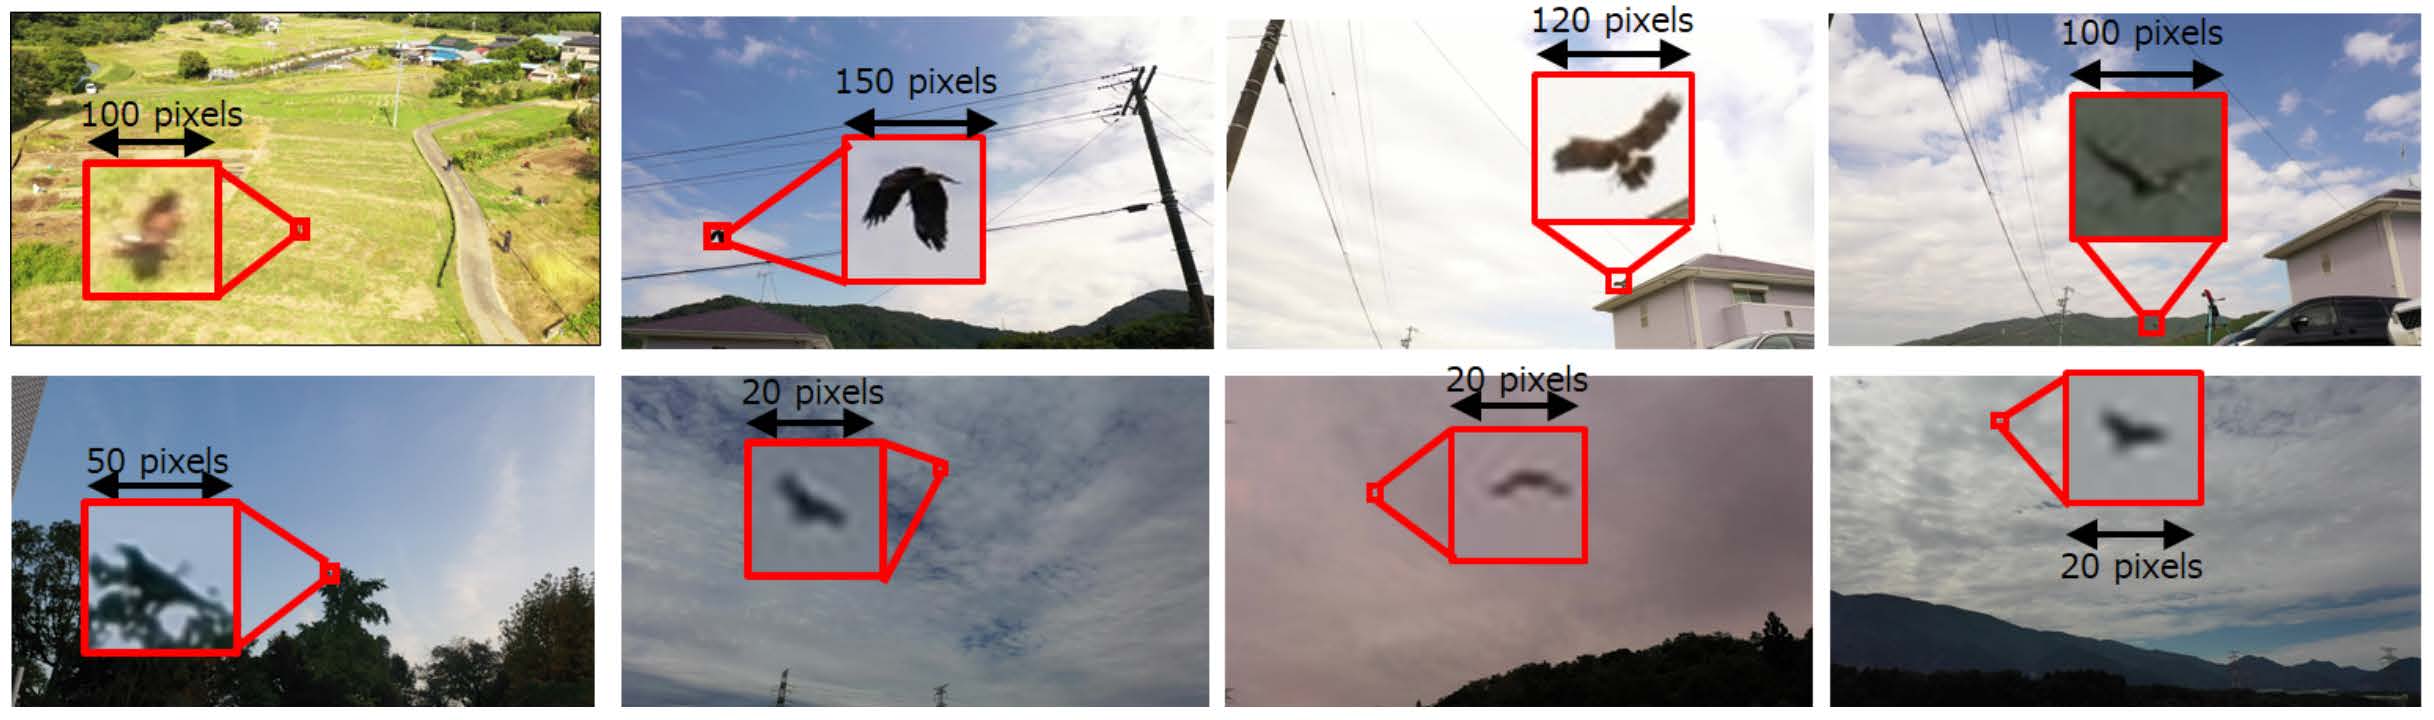 small object detection for bird sample